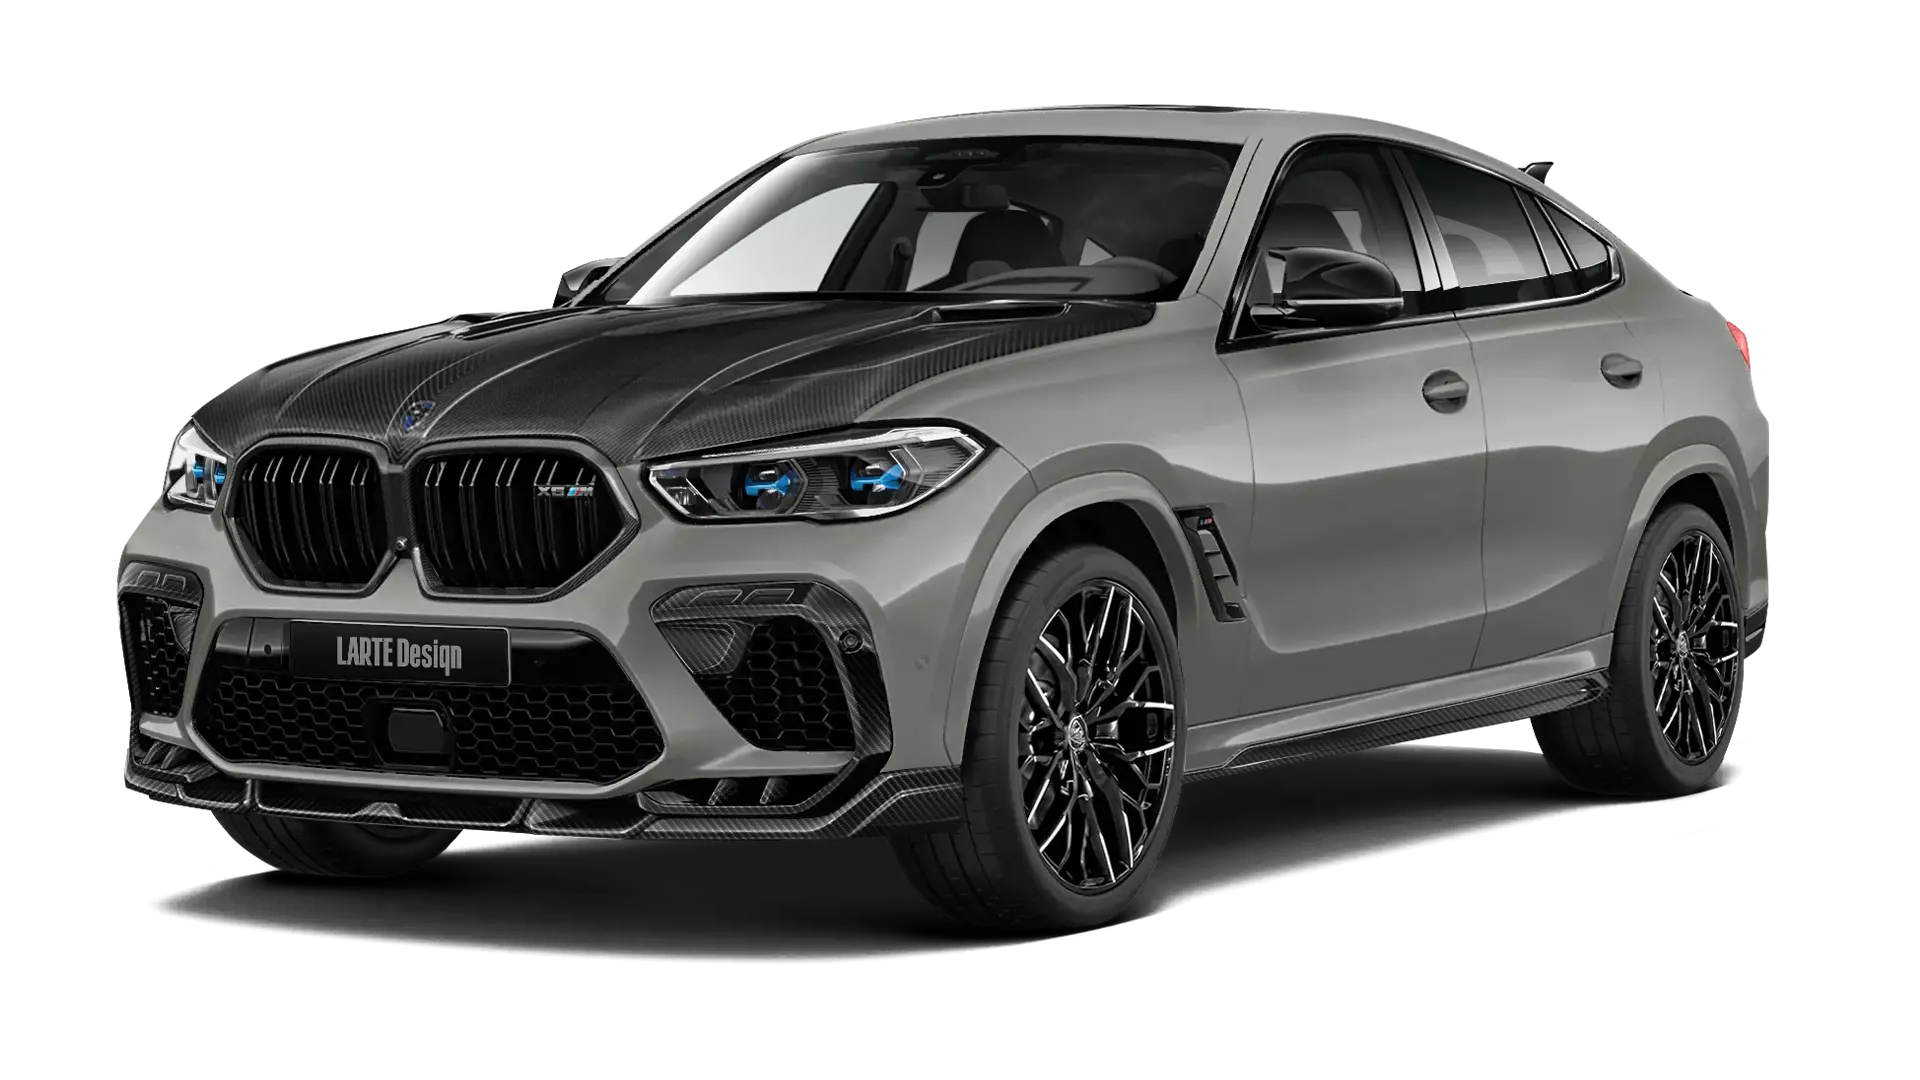 x6m COMPETITION